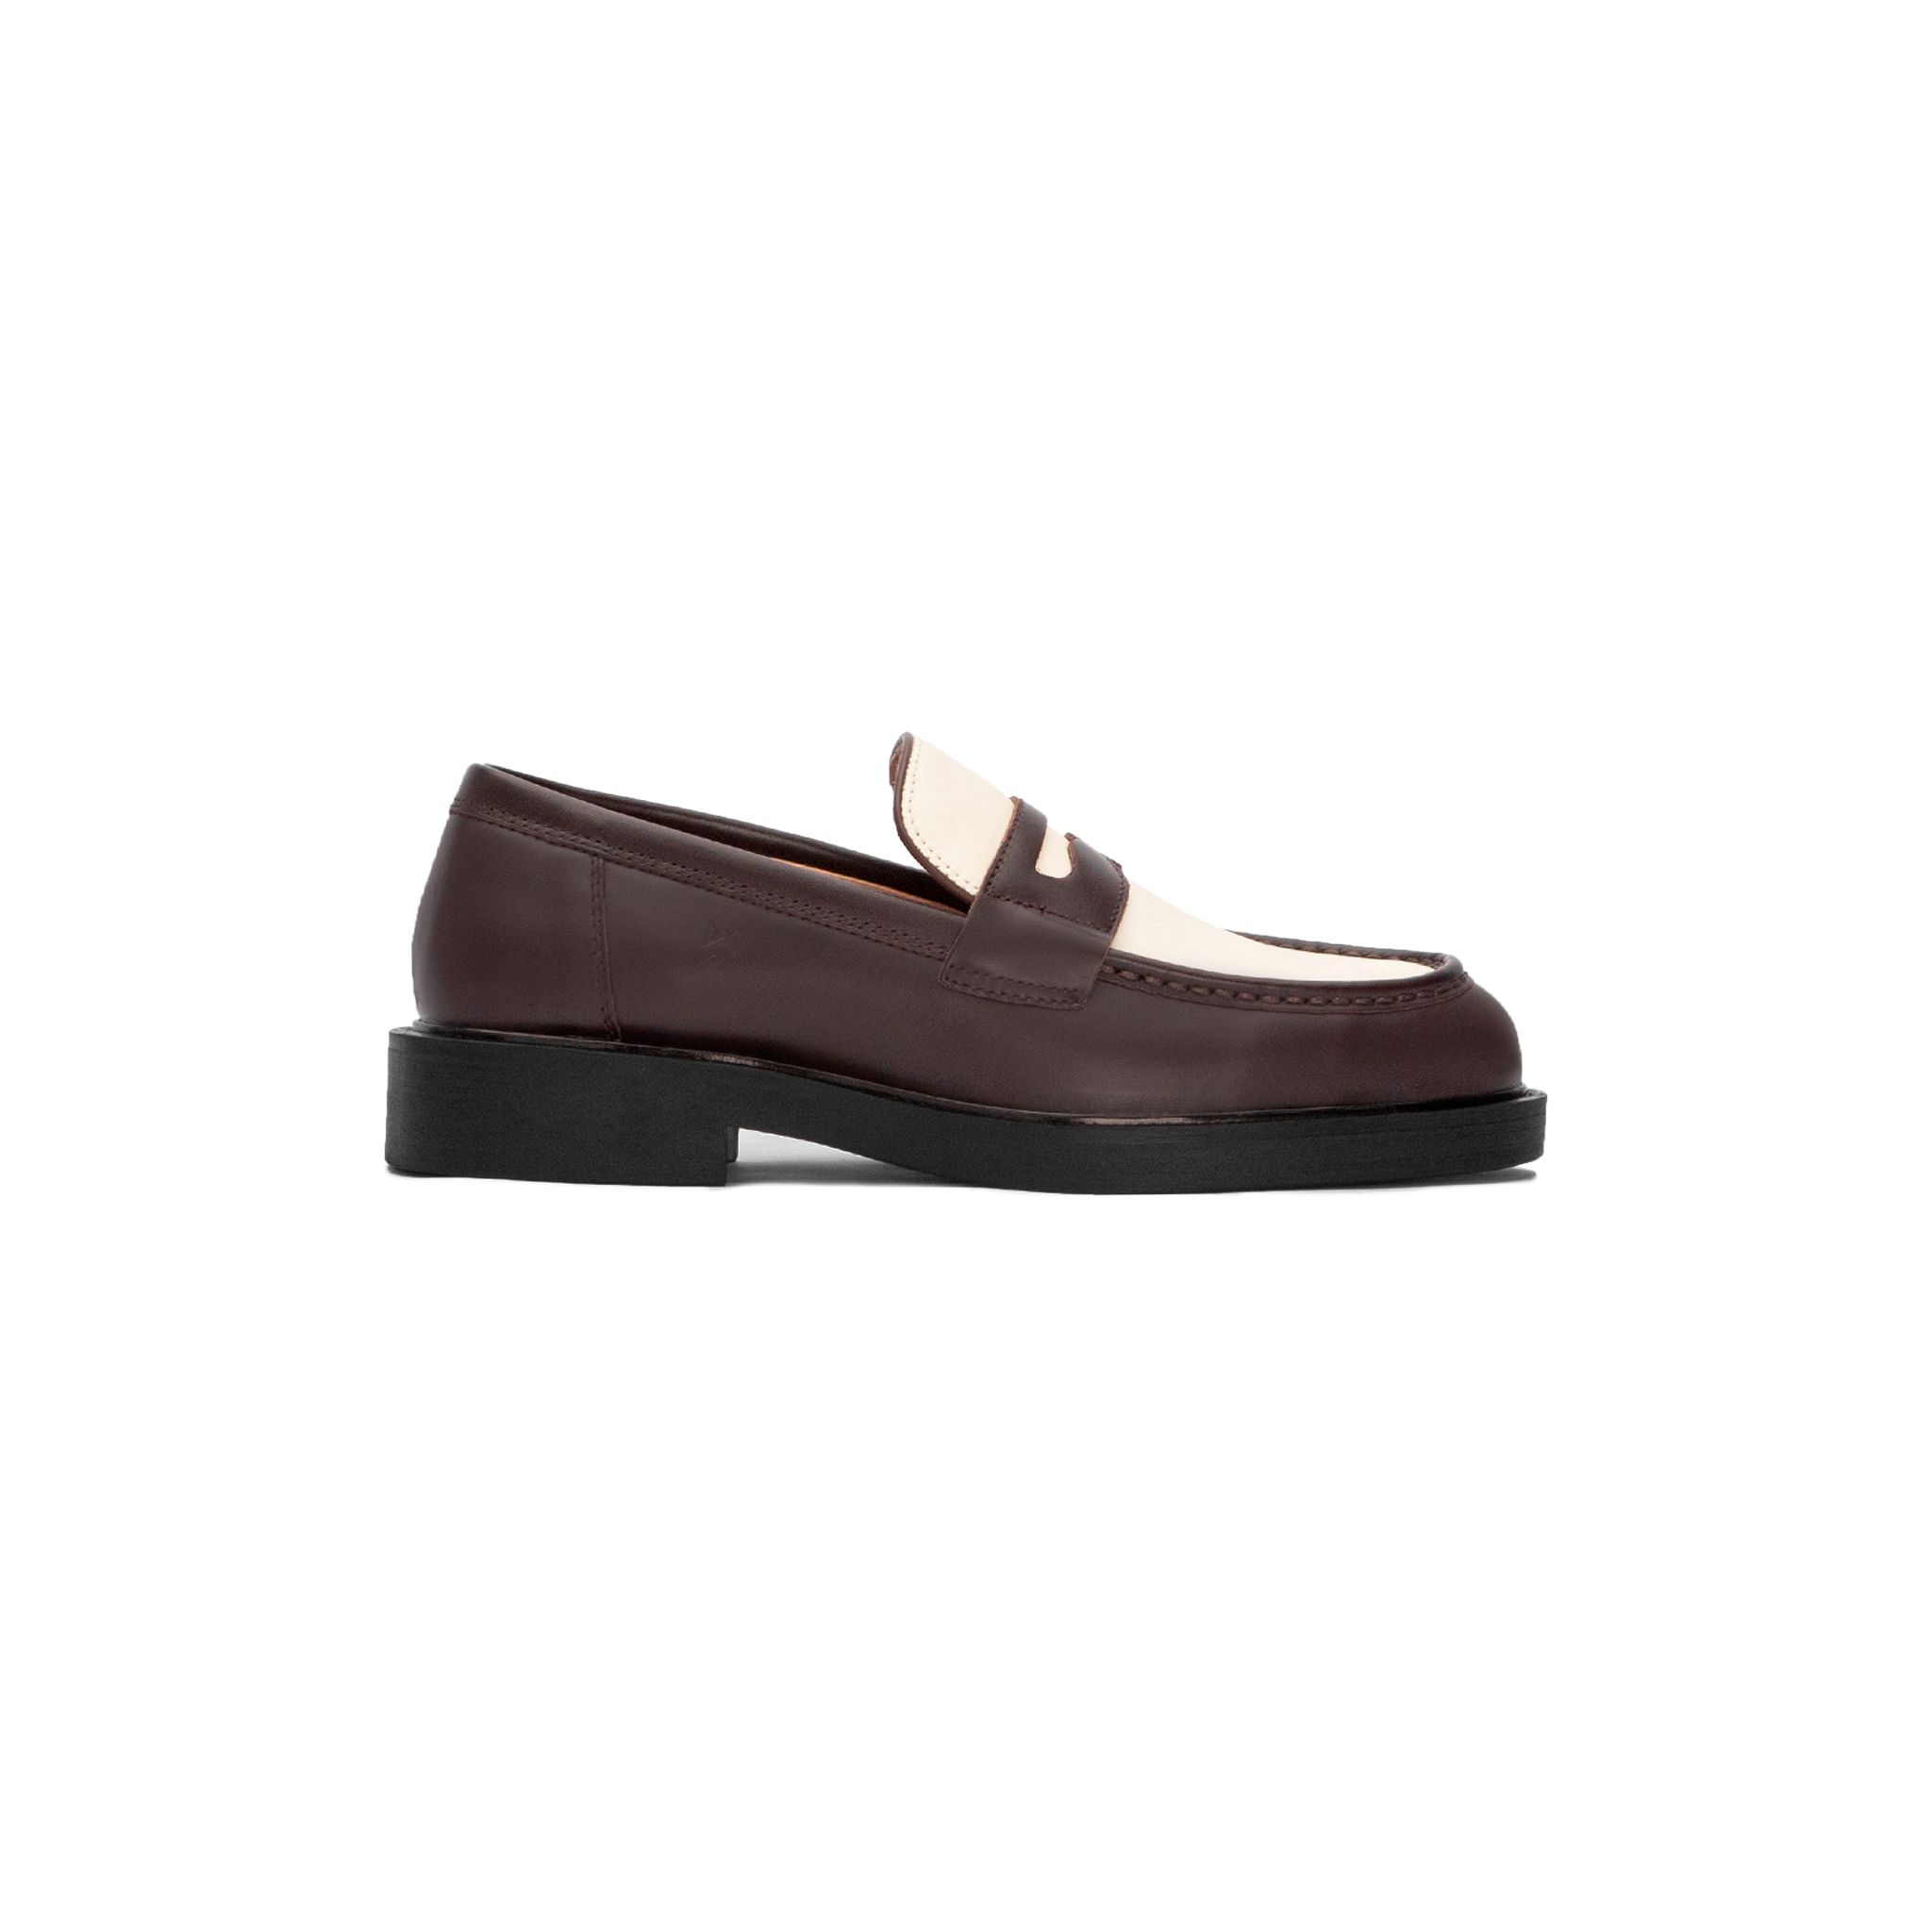  THE SEAN WOLF PENNY LOAFER - BROWN & OFF-WHITE 